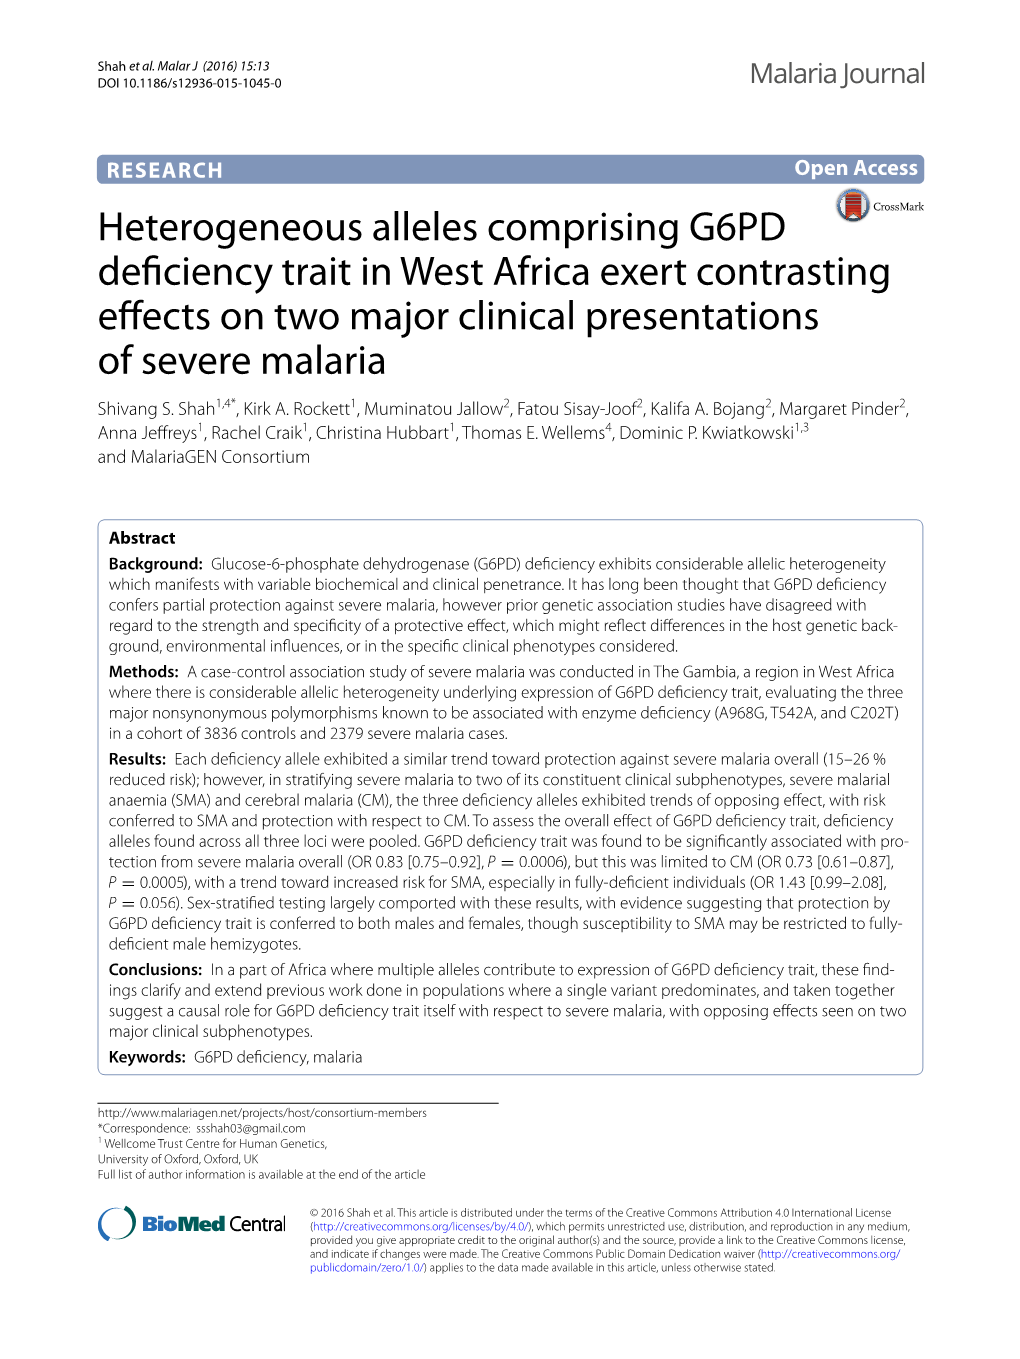 Heterogeneous Alleles Comprising G6PD Deficiency Trait in West Africa Exert Contrasting Effects on Two Major Clinical Presentations of Severe Malaria Shivang S